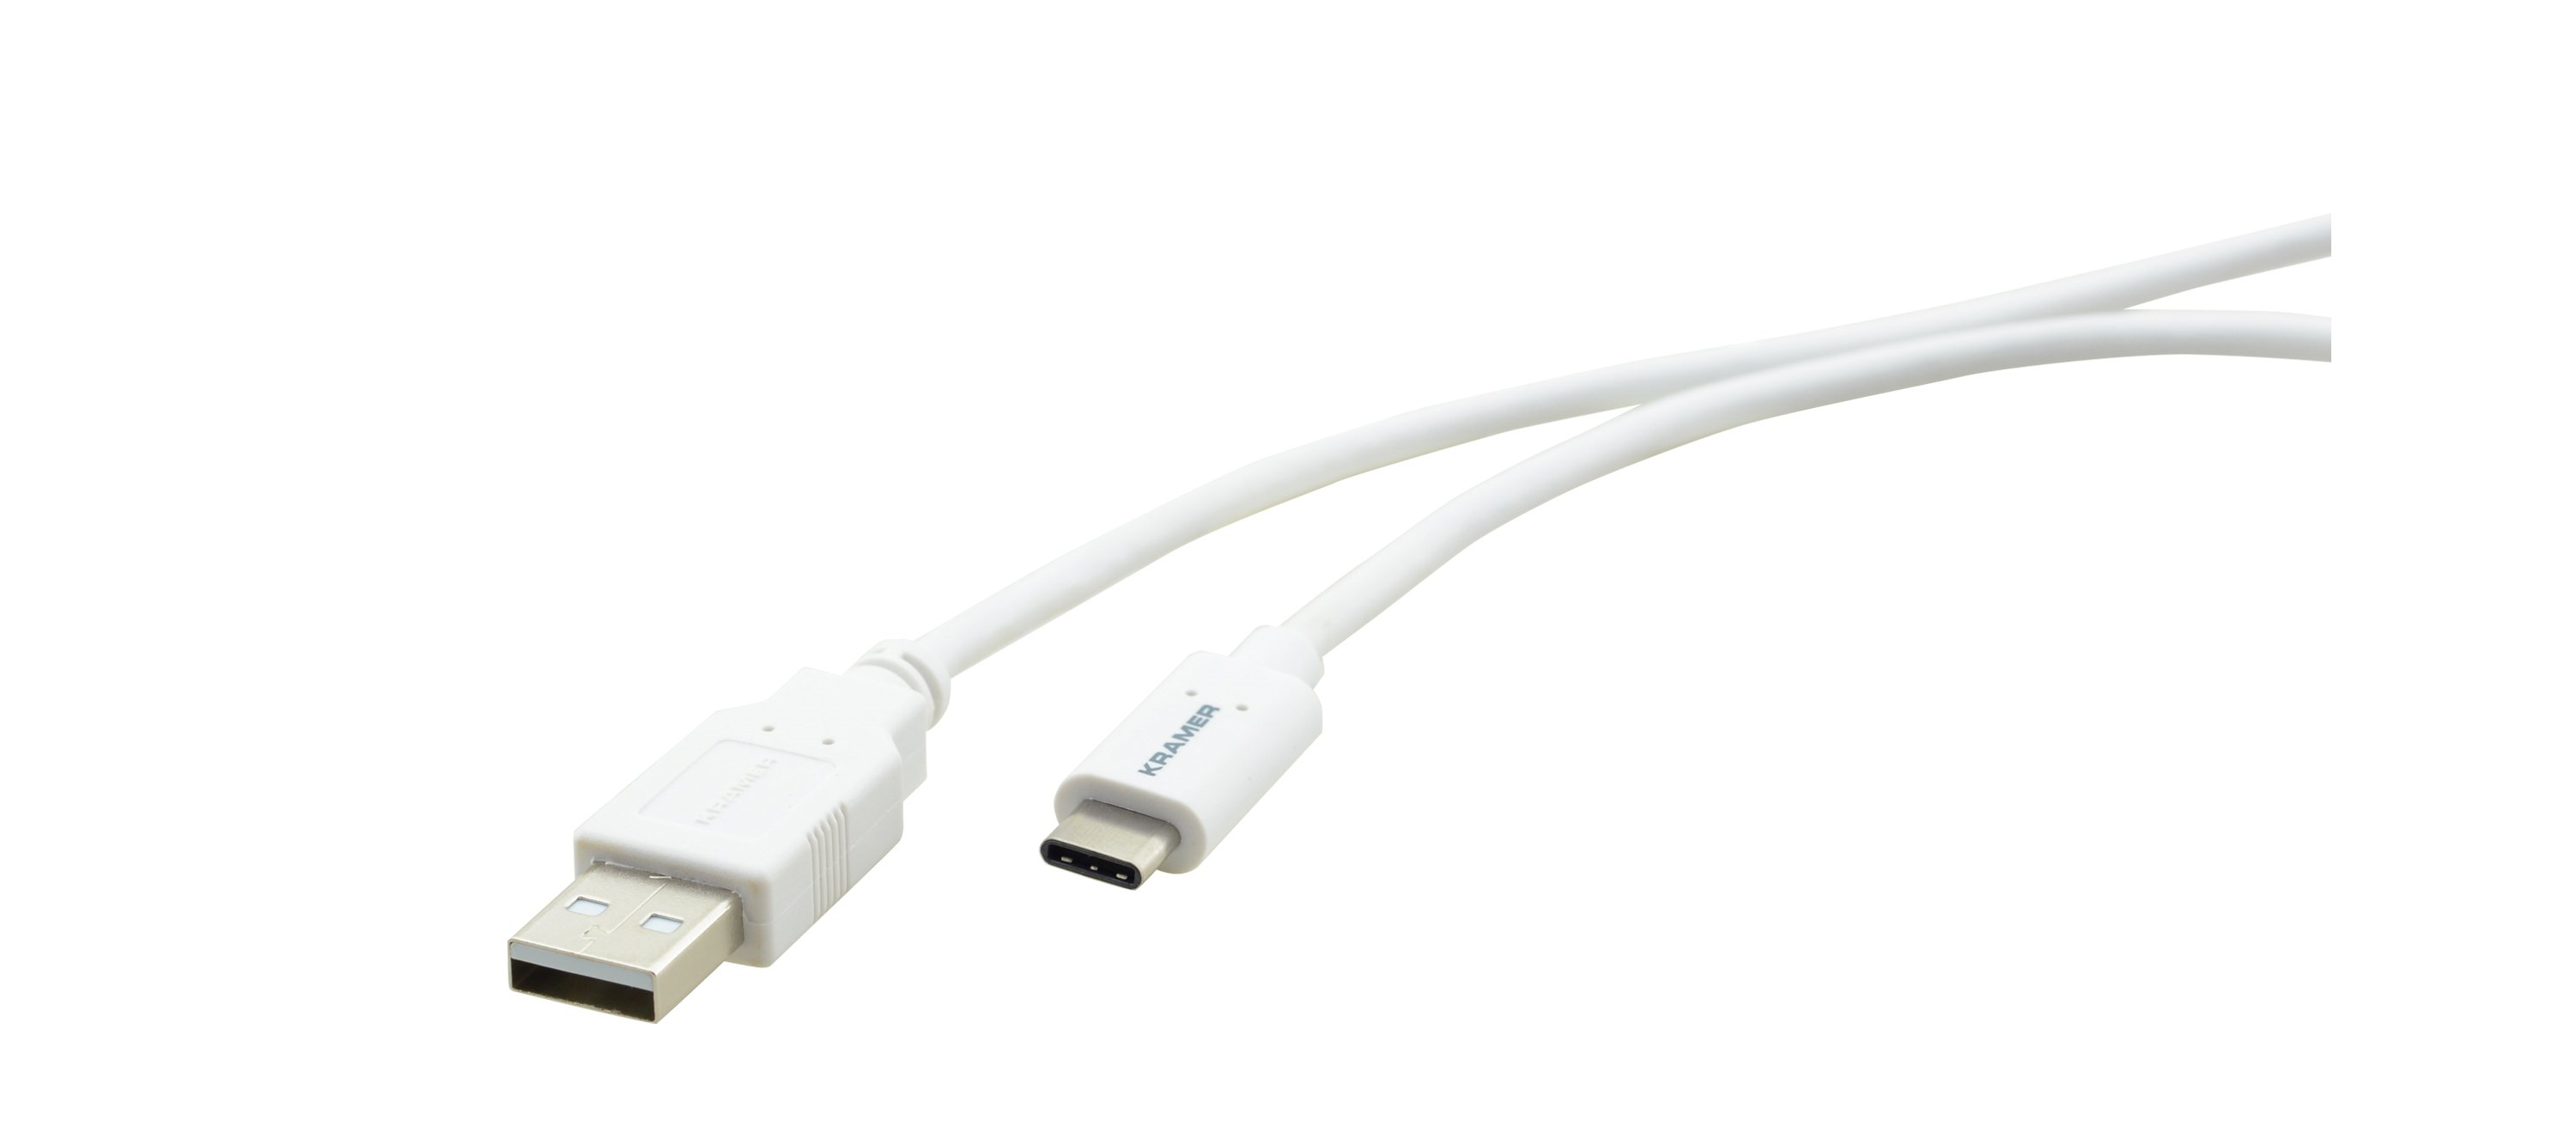 C-USB/CA-10 USB 2.0 C(M) to A(M) Cable-10ft